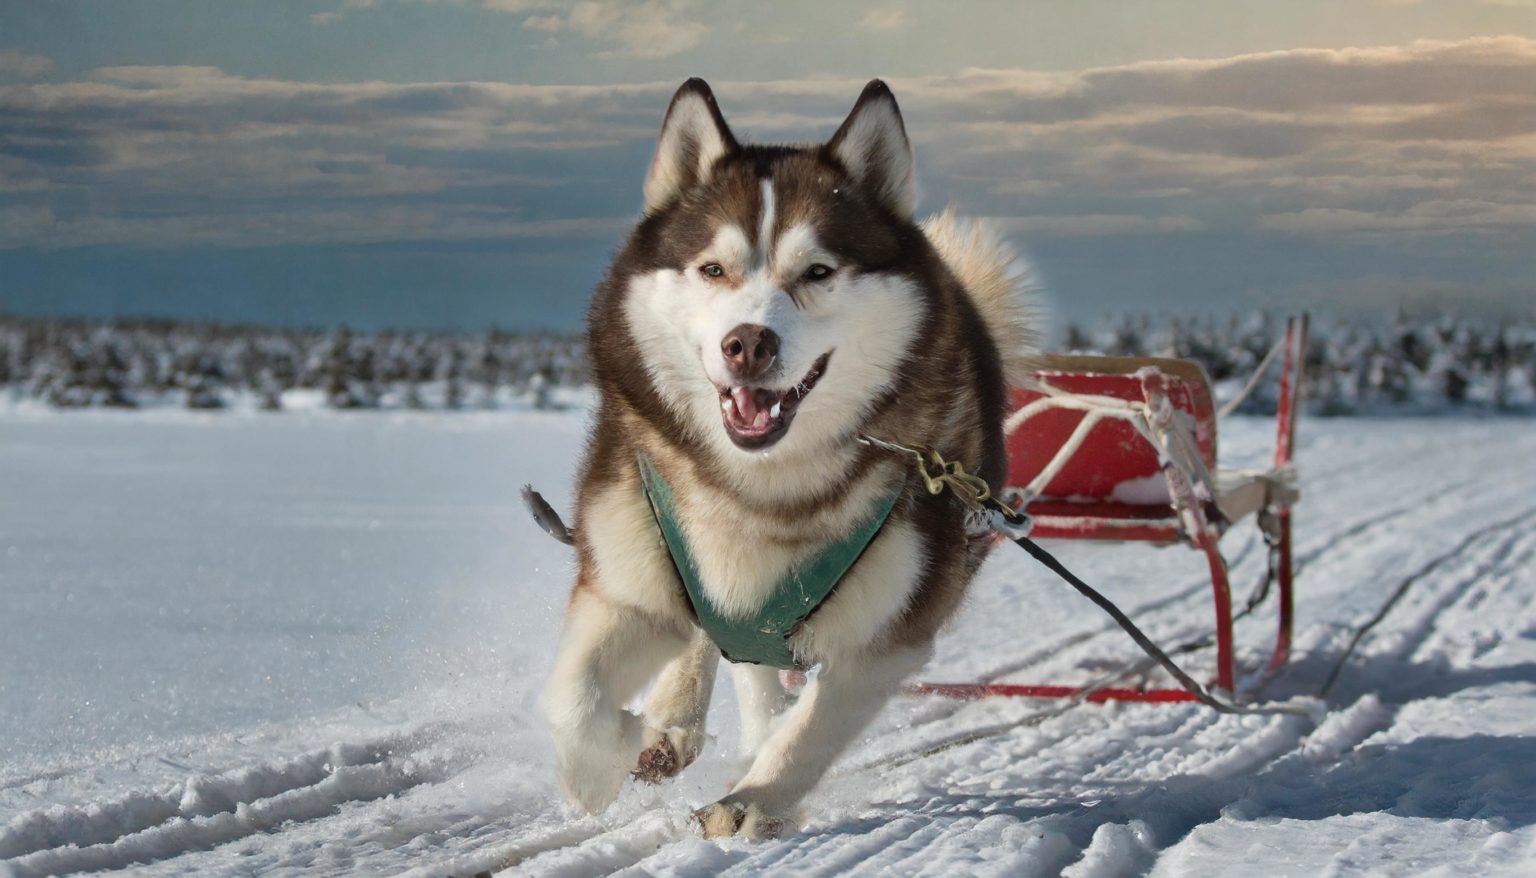 The Canadian Eskimo Dog is an Arctic breed of working dog. Another name for it is qimmiq, and it was brought to North America from Siberia by the Thule people.